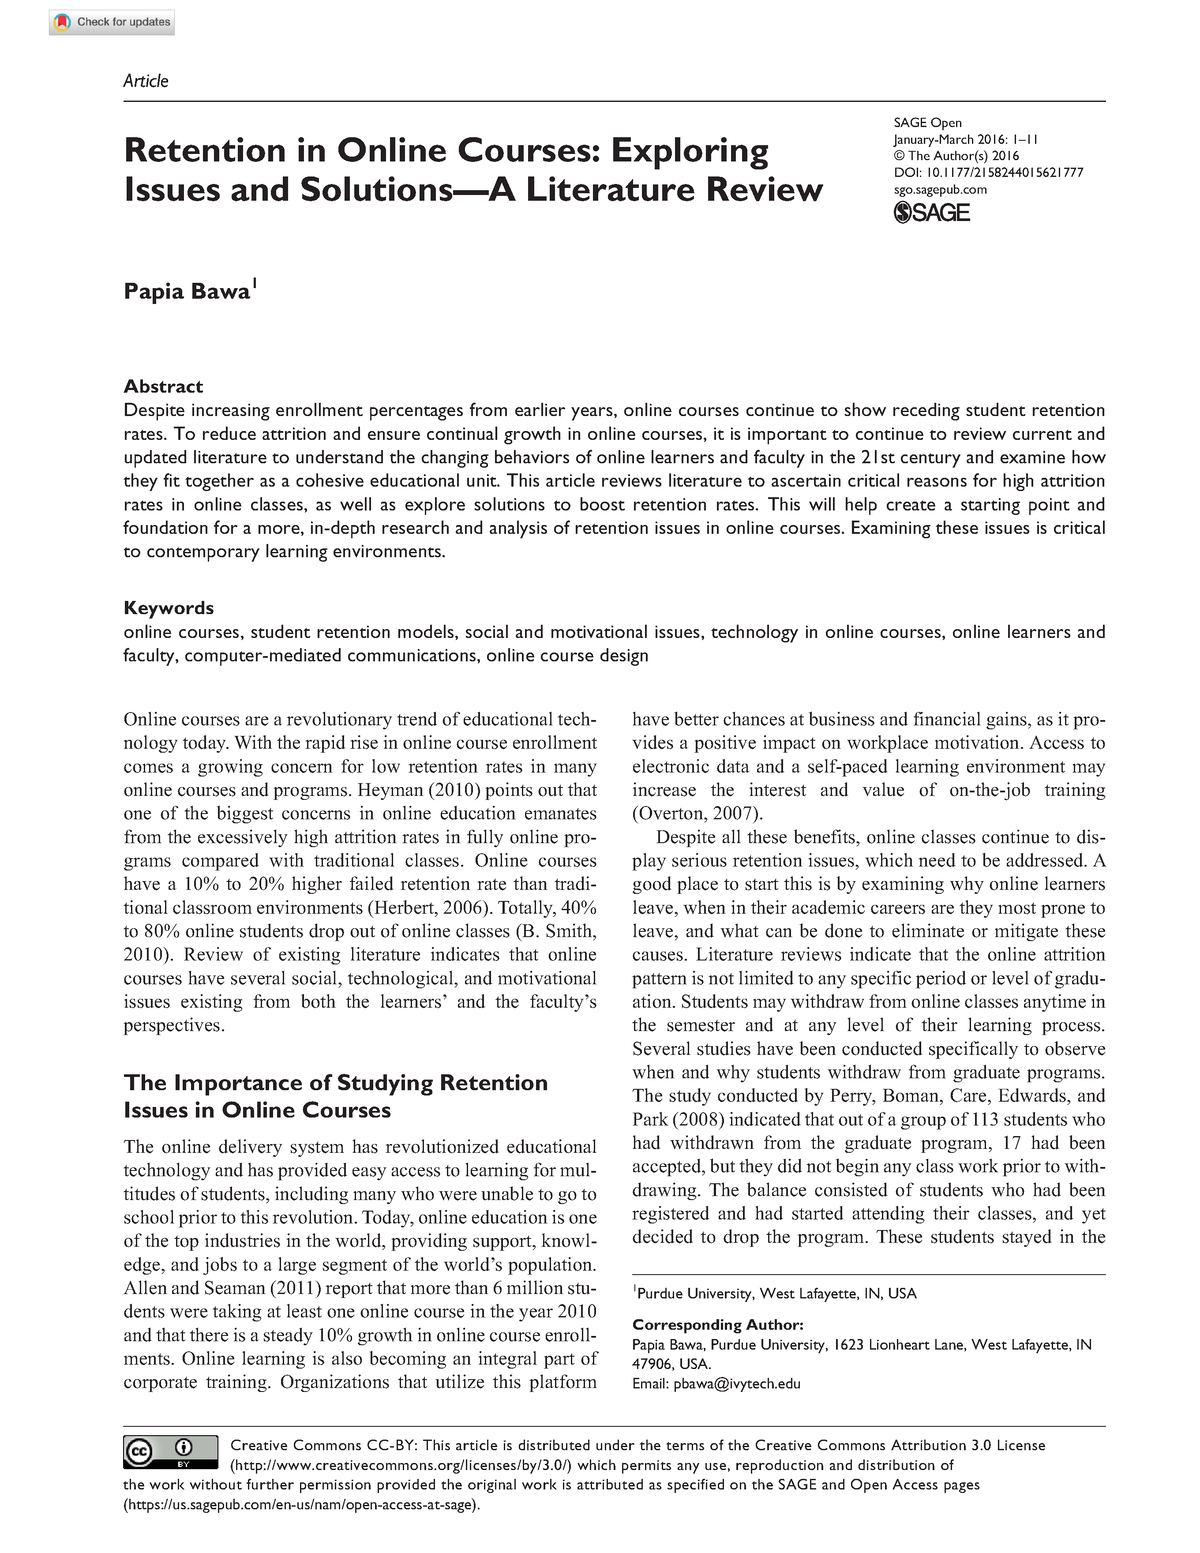 literature review of online education